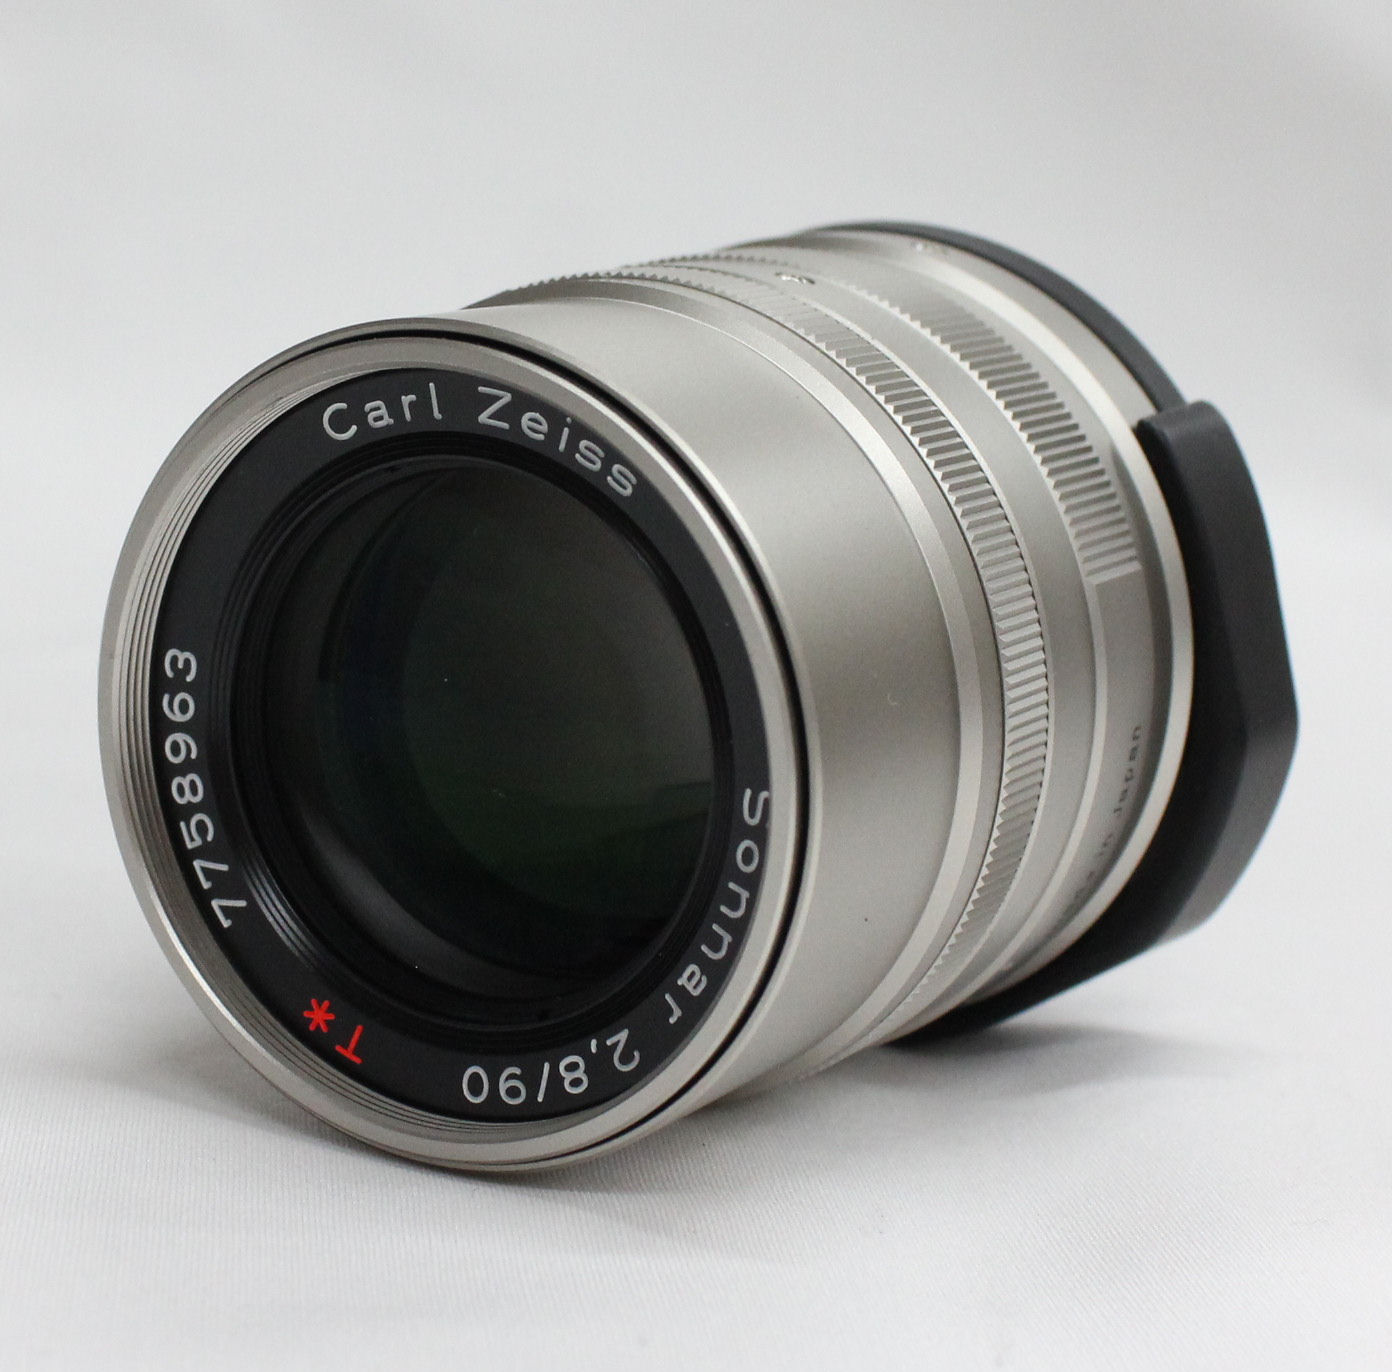  Contax Carl Zeiss Sonnar 90mm F/2.8 T* AF Lens with Hood/Filter/Case for G1 G2 from JAPAN Photo 1